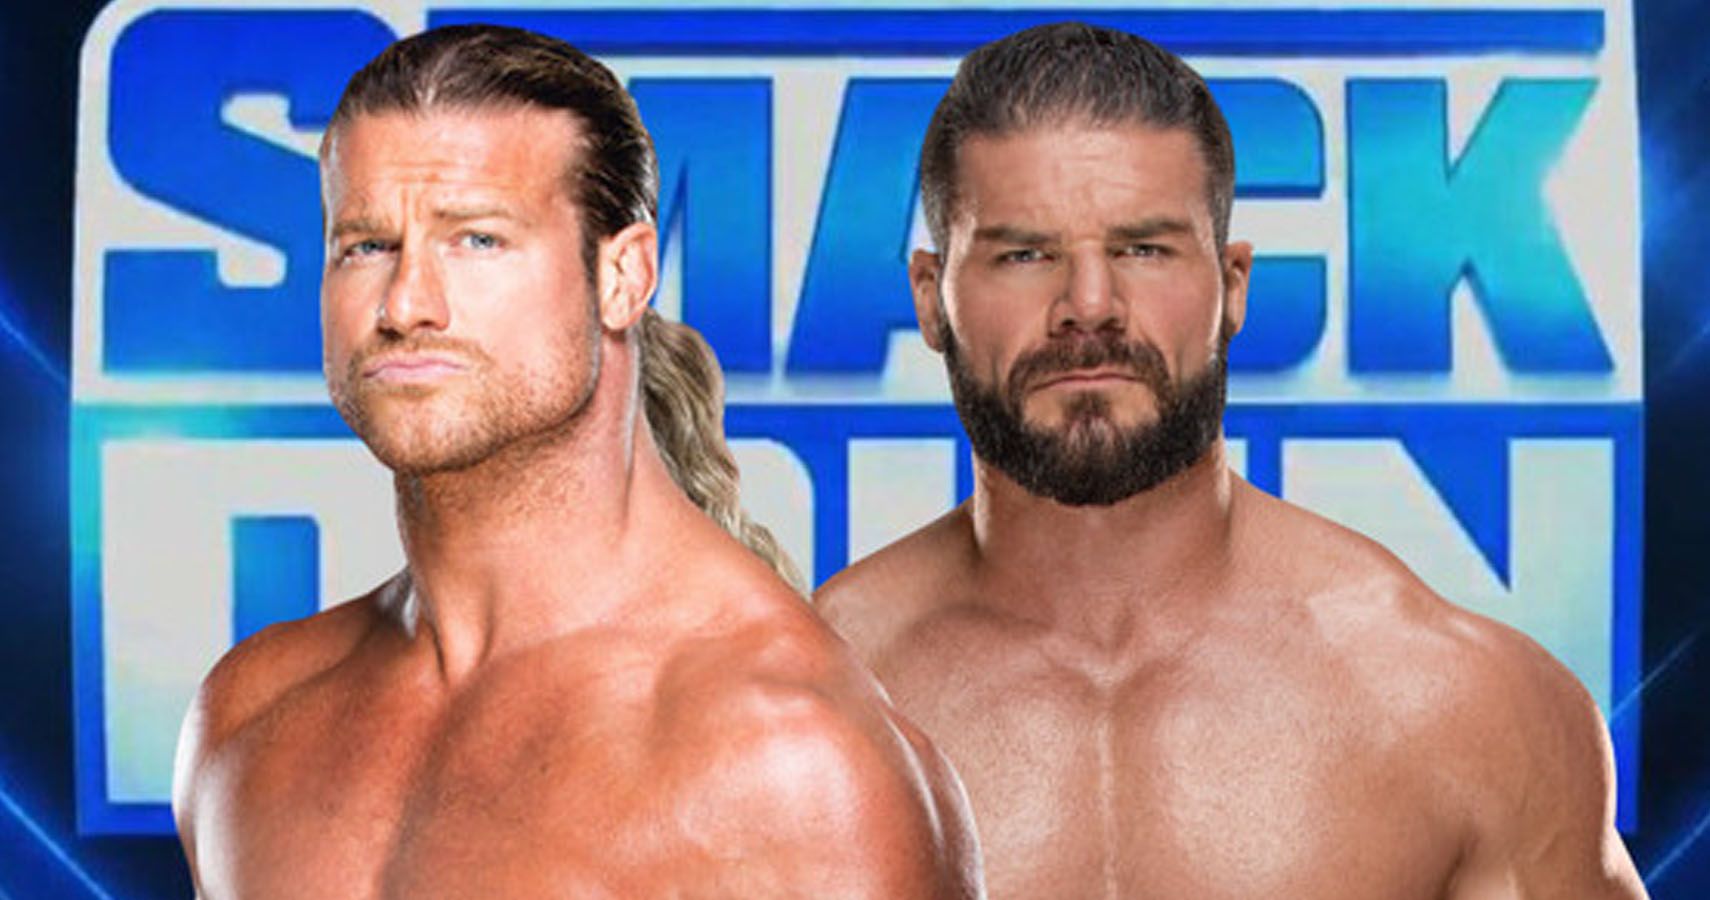 Dolph Ziggler And Robert Roode Are New Smackdown Team Champions